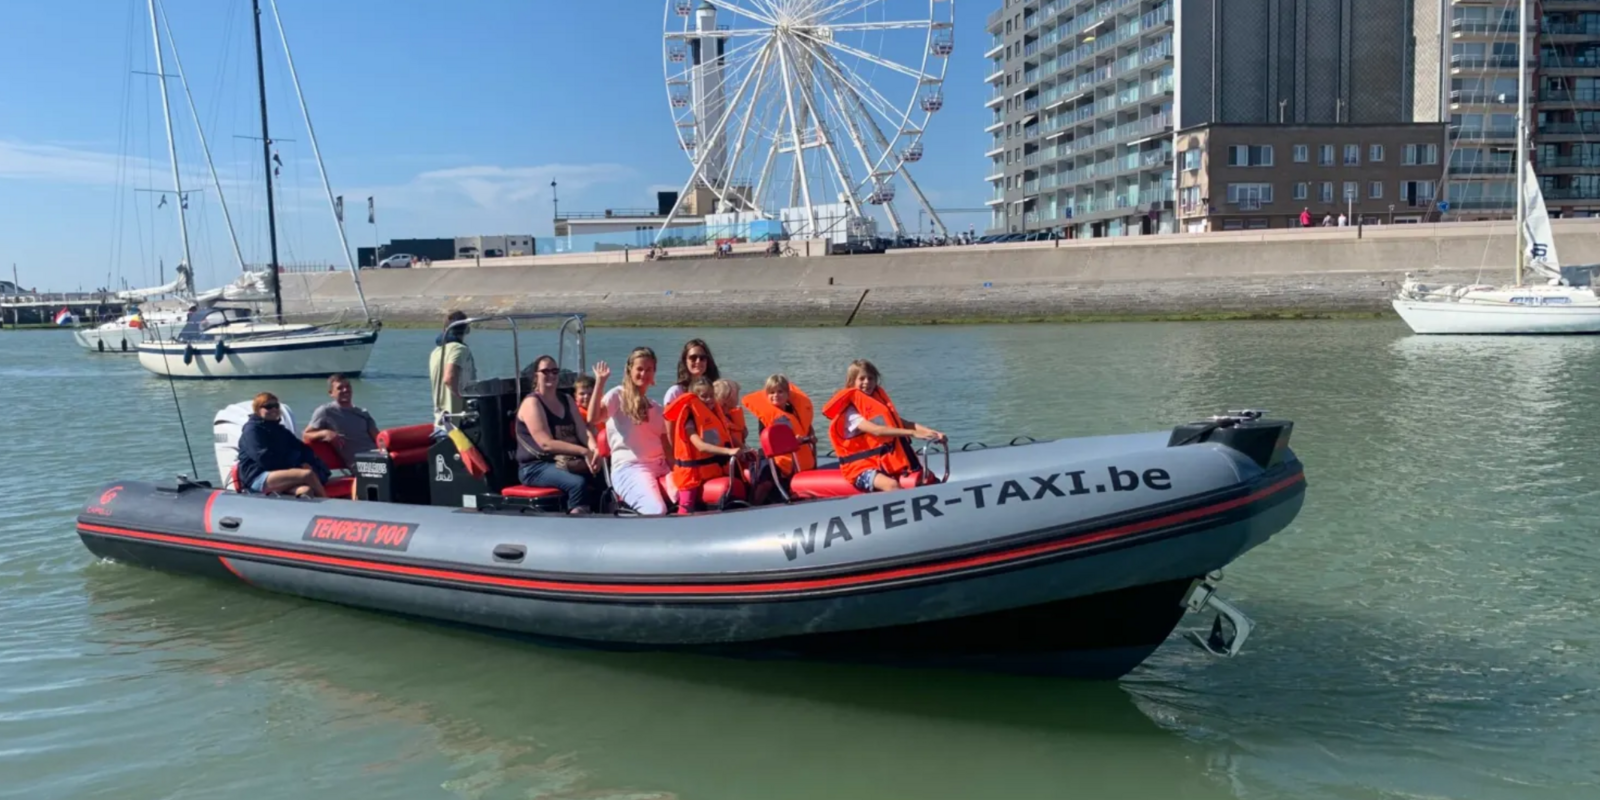 Water-taxi